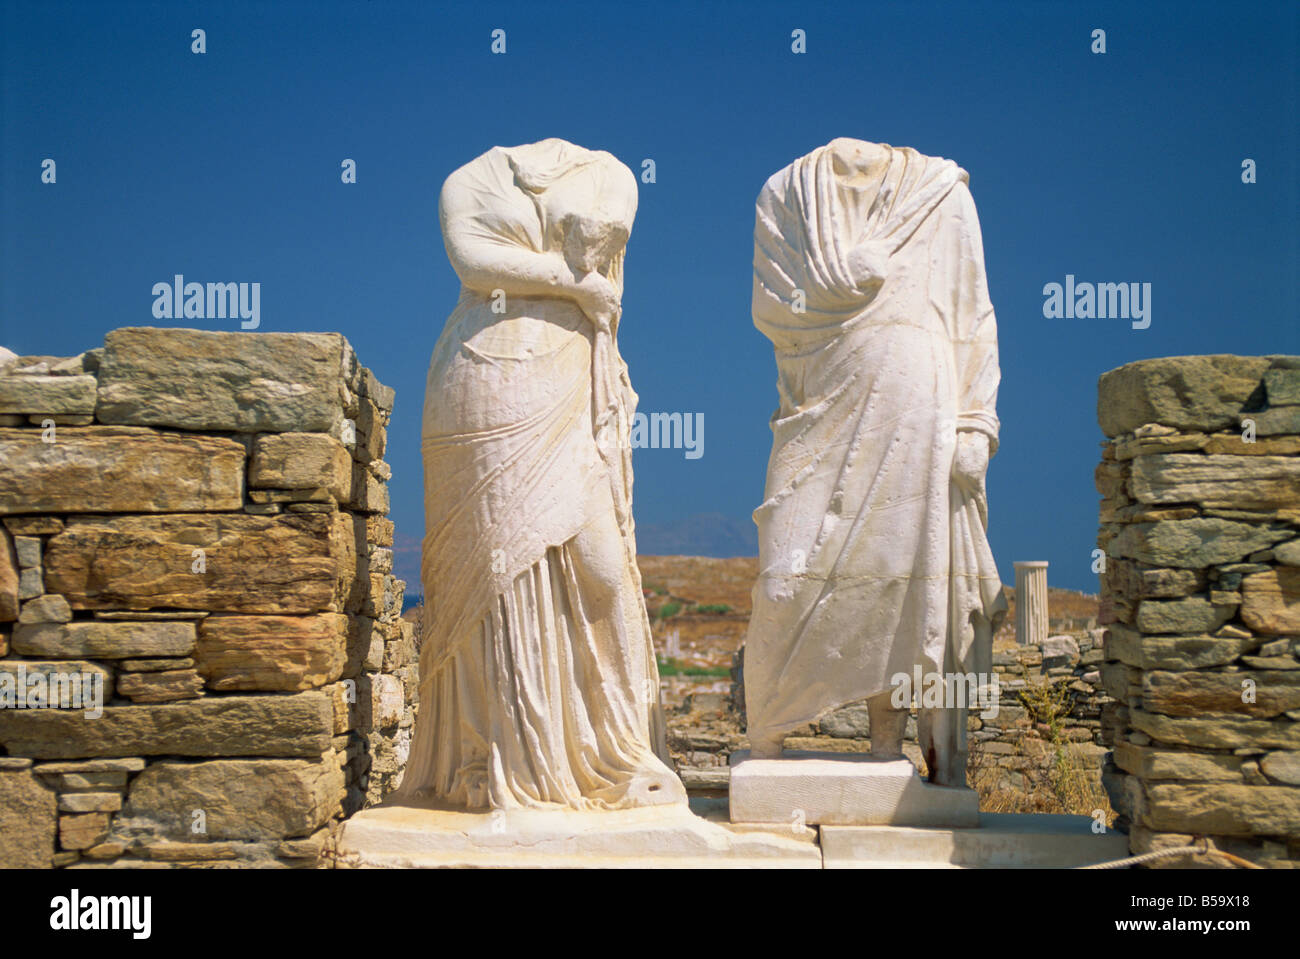 Headless statues of Cleopatra and Dioskovridis, Delos, UNESCO World Heritage Site, Cyclades Islands, Greek Islands, Greece Stock Photo